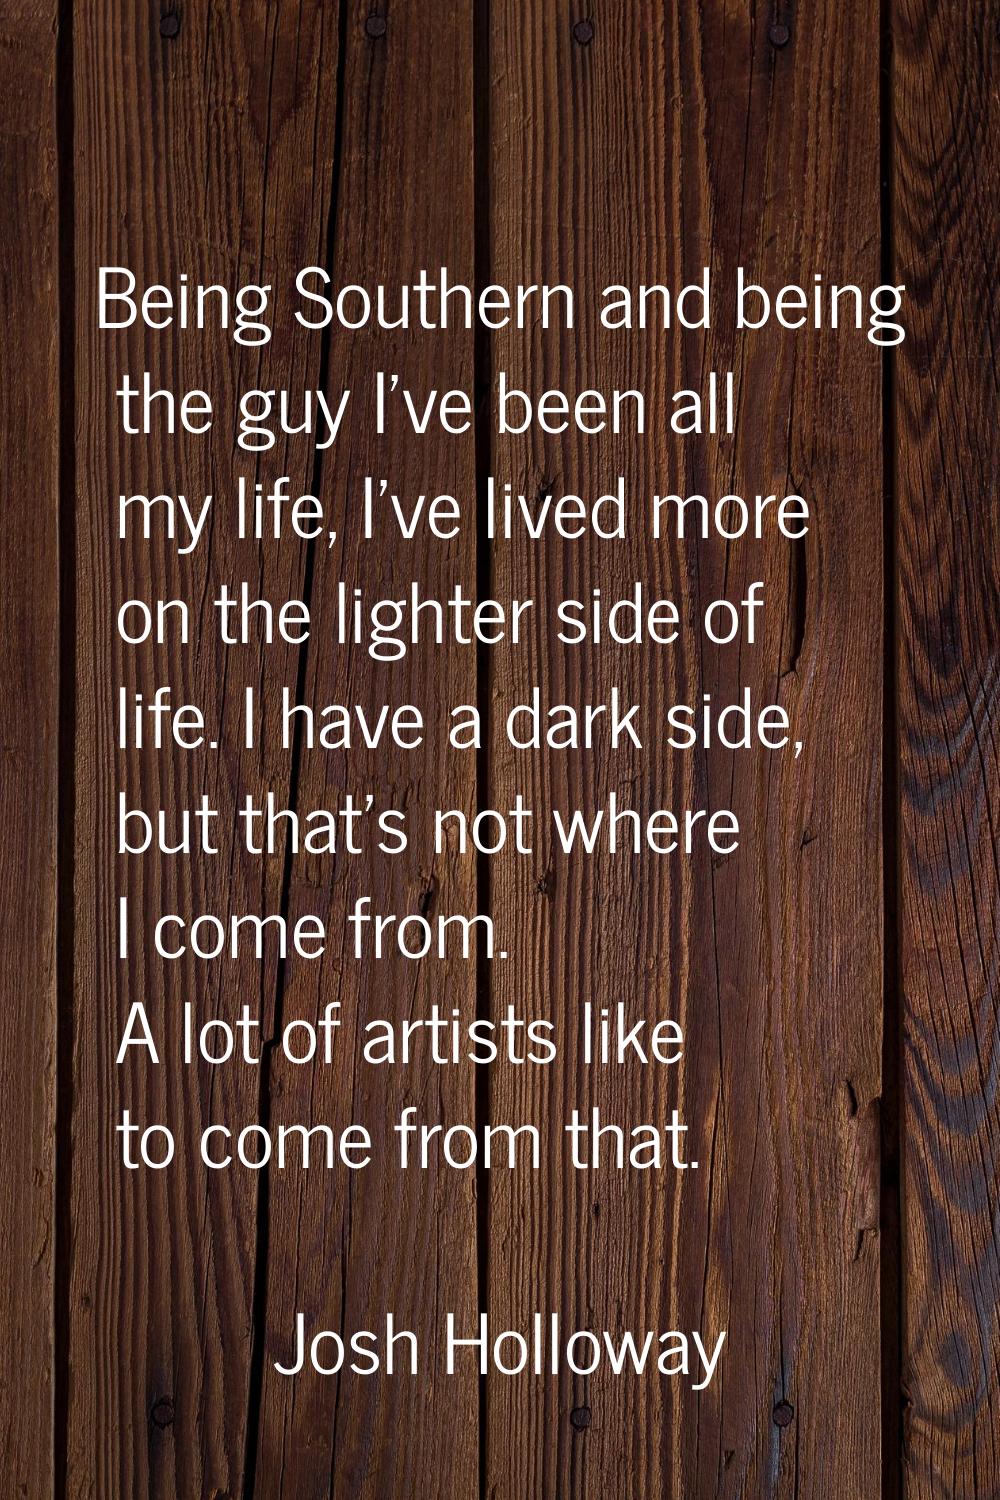 Being Southern and being the guy I've been all my life, I've lived more on the lighter side of life